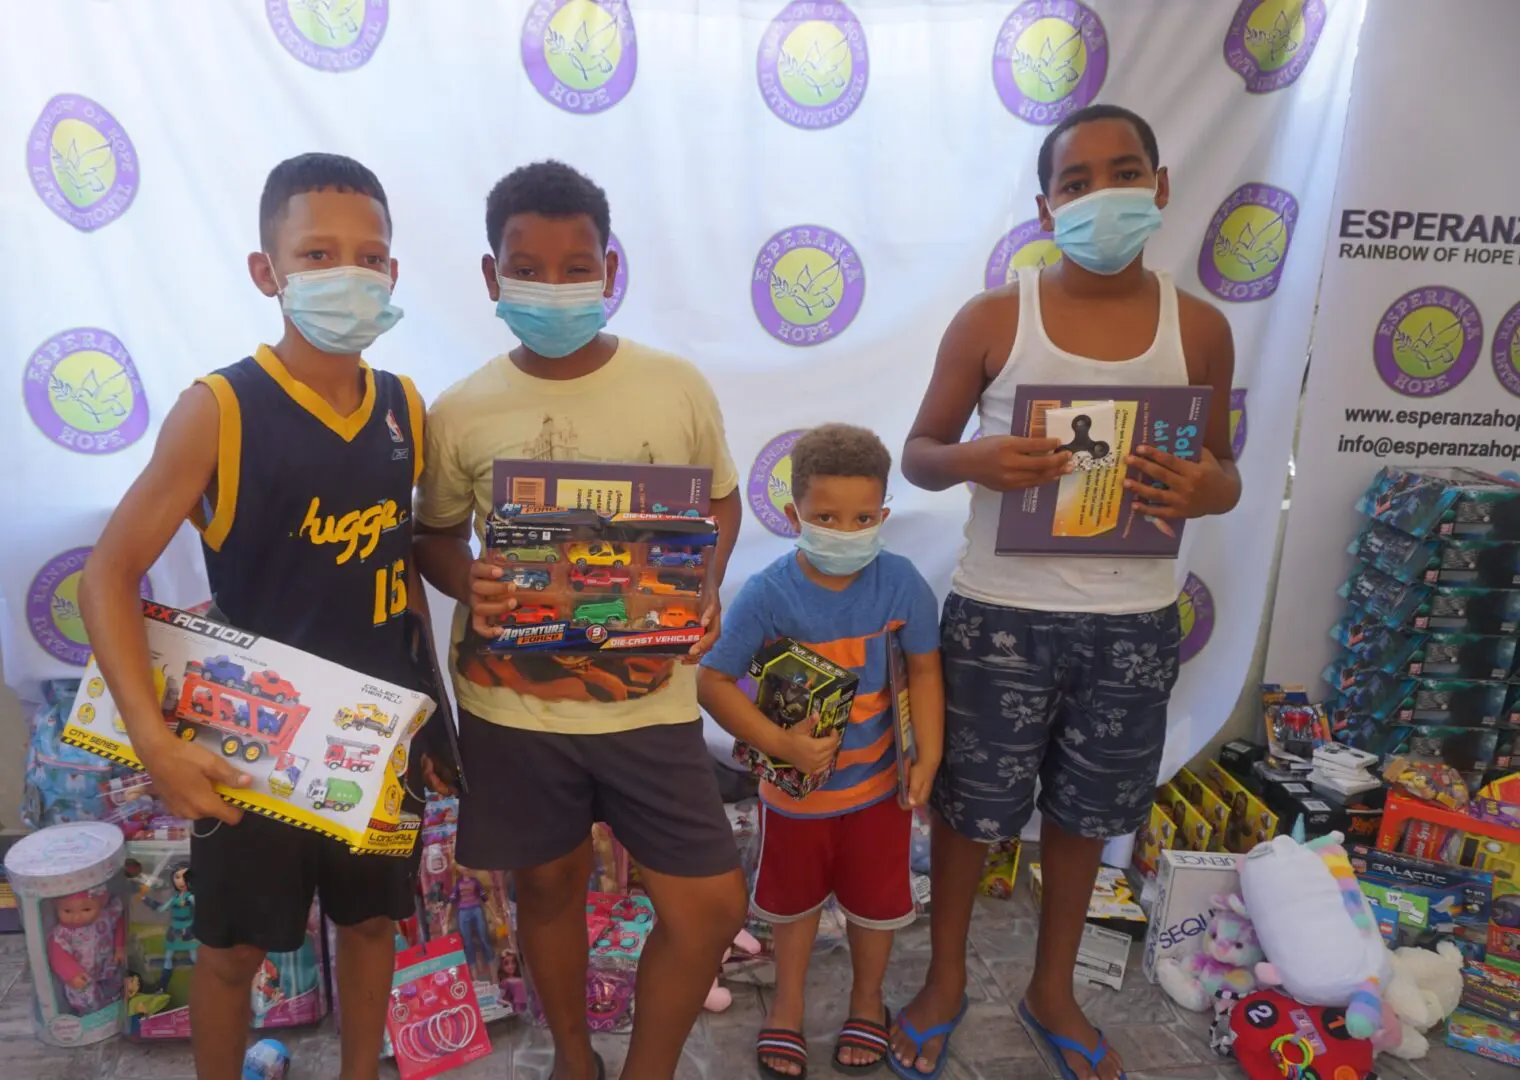 Four boys standing against the Esperanza-Hope backdrop with their toys and books, batch 4